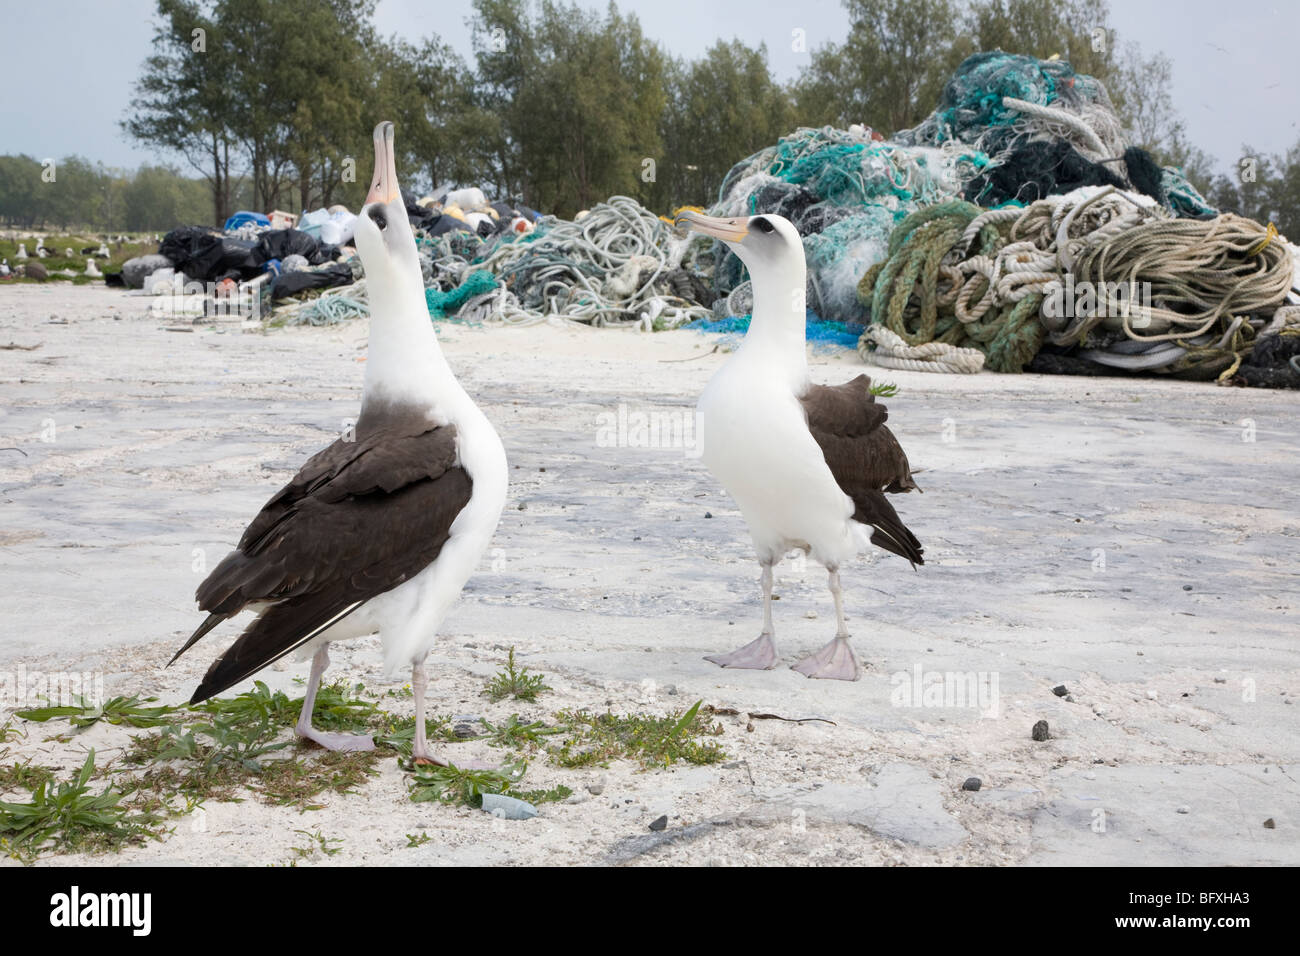 Laysan Albatross courtship dance near pile of marine debris including fishing nets and plastic collected on North Pacific island shores Stock Photo